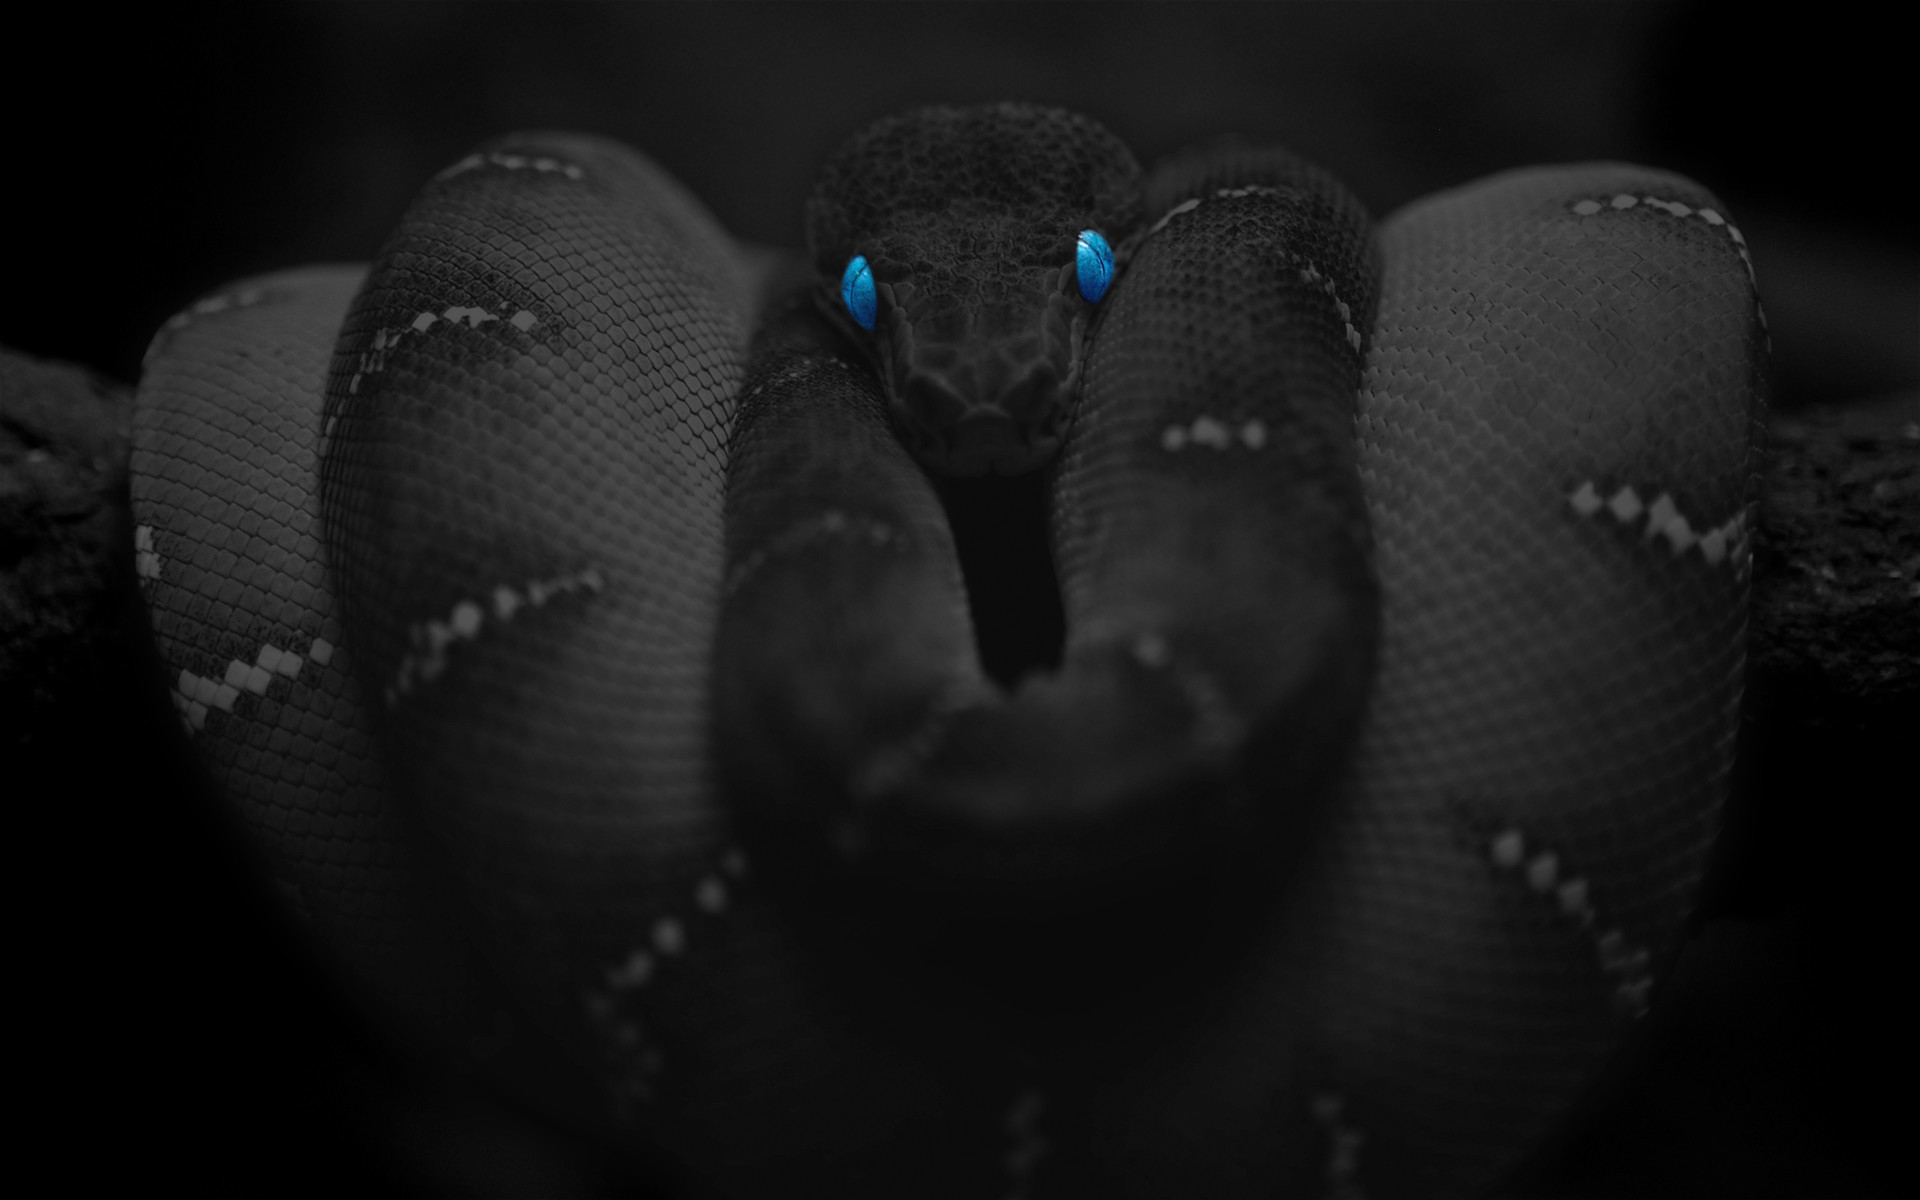 Blue Snakes Background Pictures Of Poisonous Snakes Picture Of Blue Snakes  Background Background Image And Wallpaper for Free Download